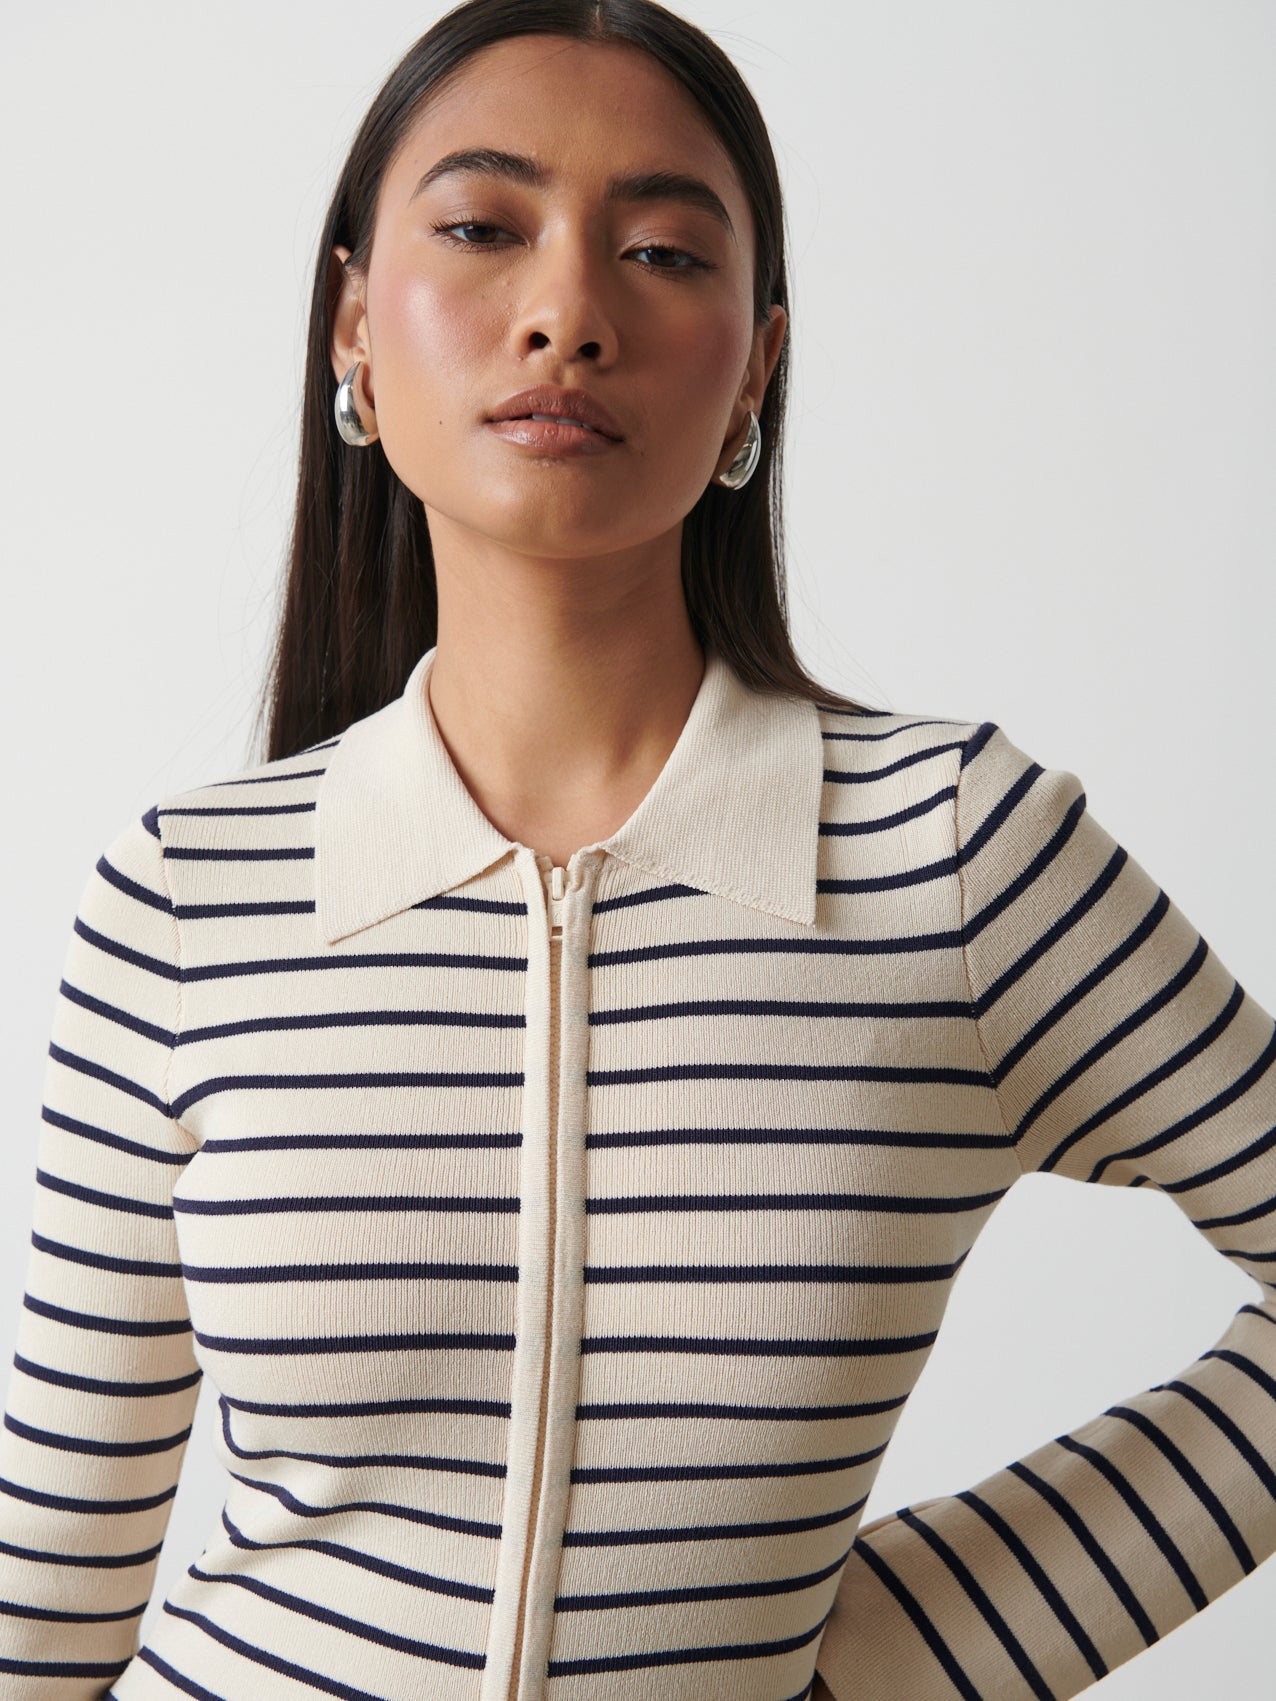 Avery Striped Zip Knit Top - Cream and Navy